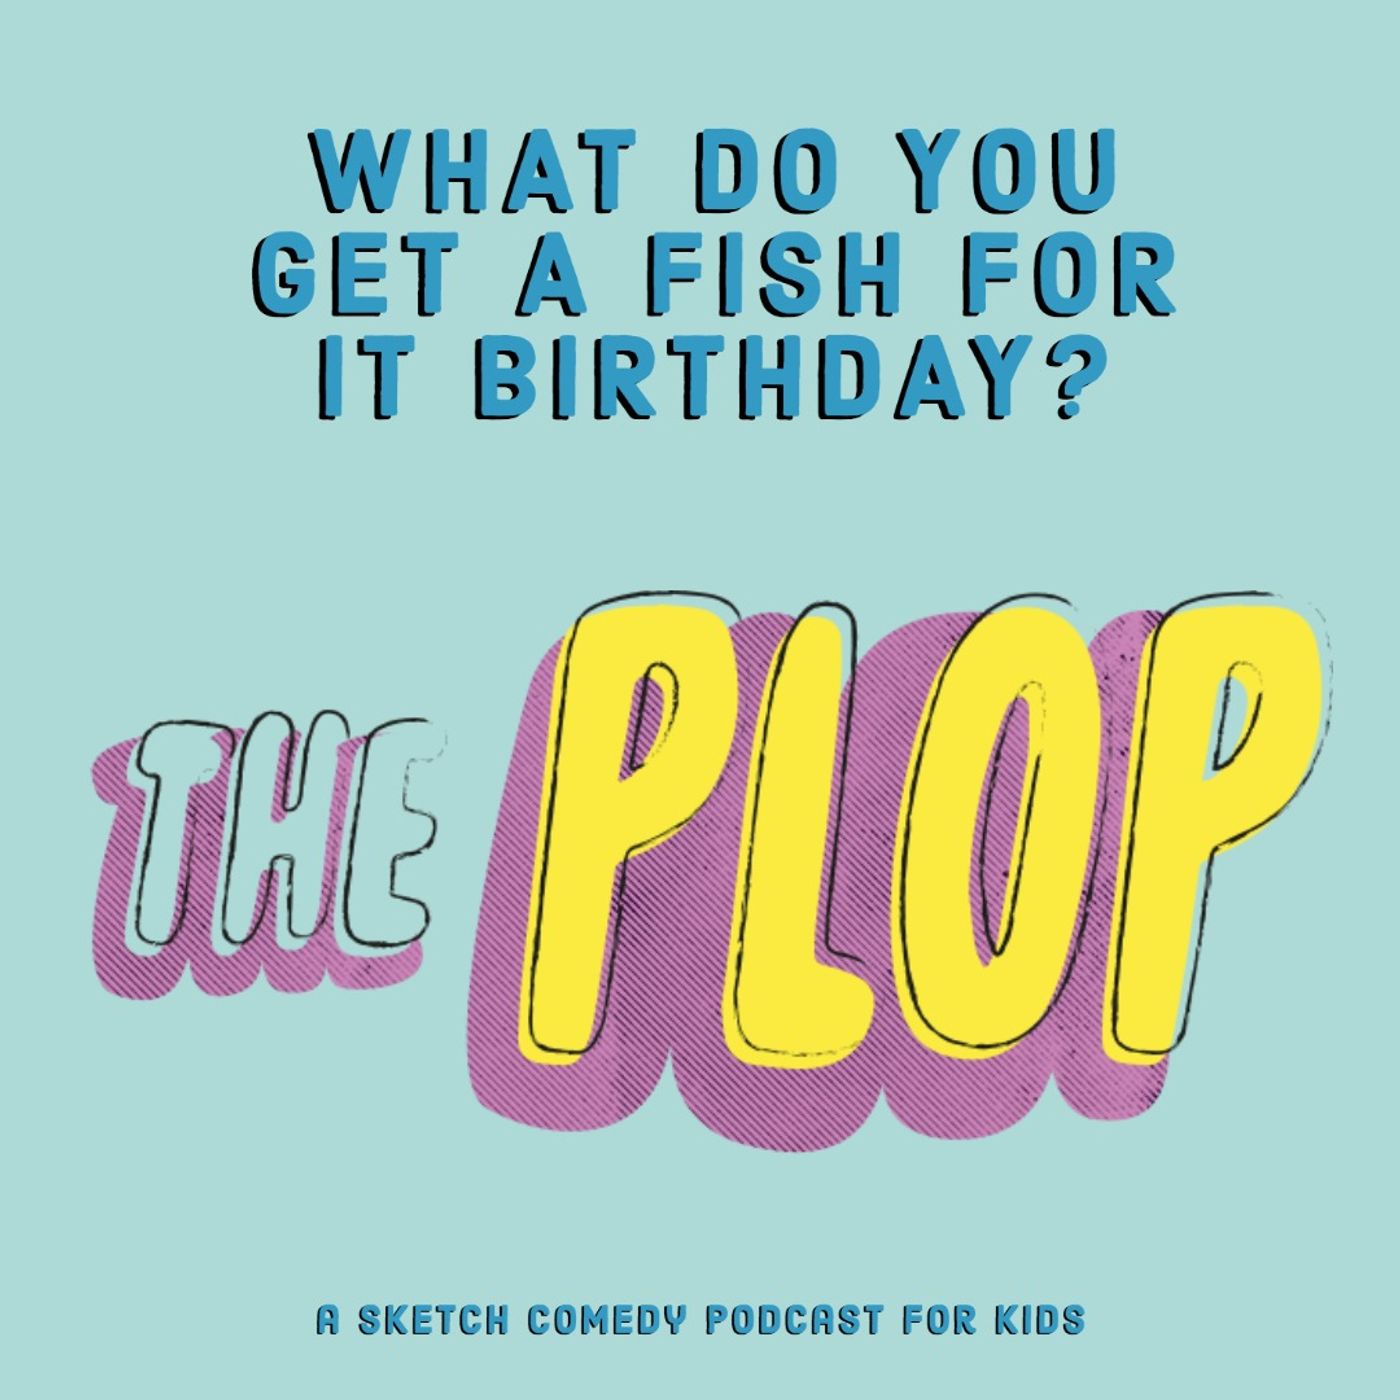 What Do You Get a Fish For its Birthday?